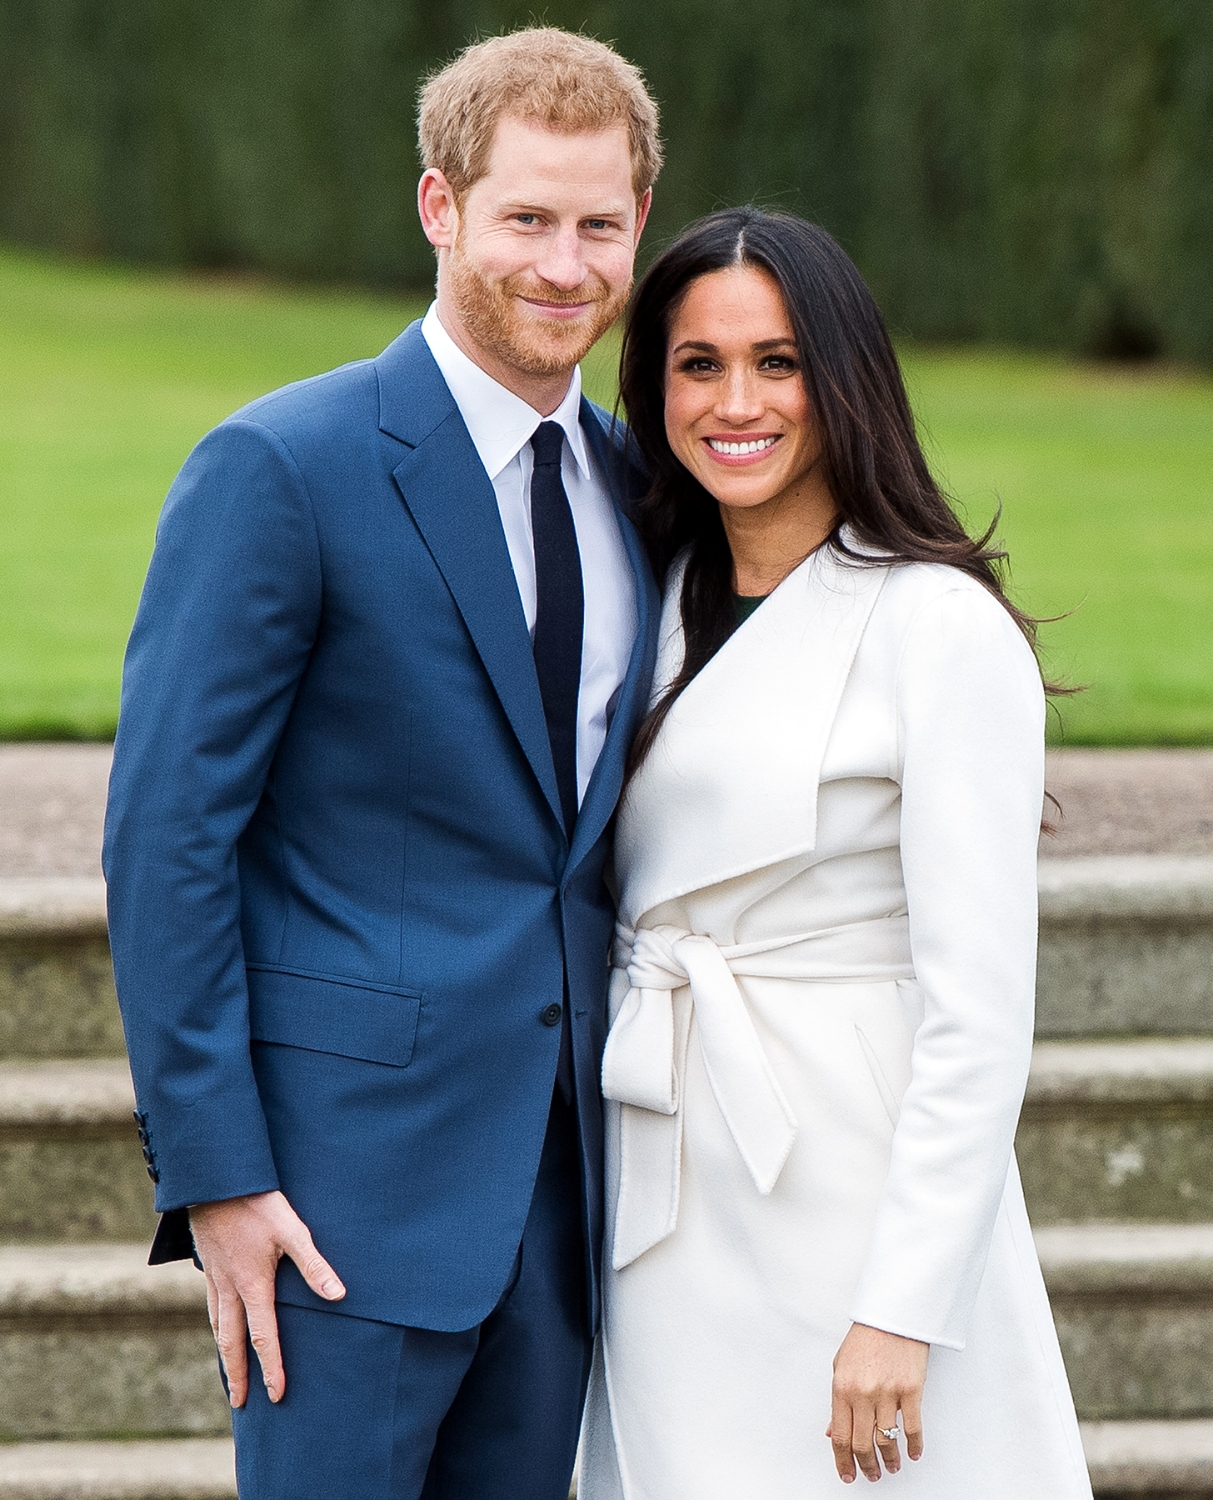 Us Weekly / Prince Harry Meghan Markle announce their engagement